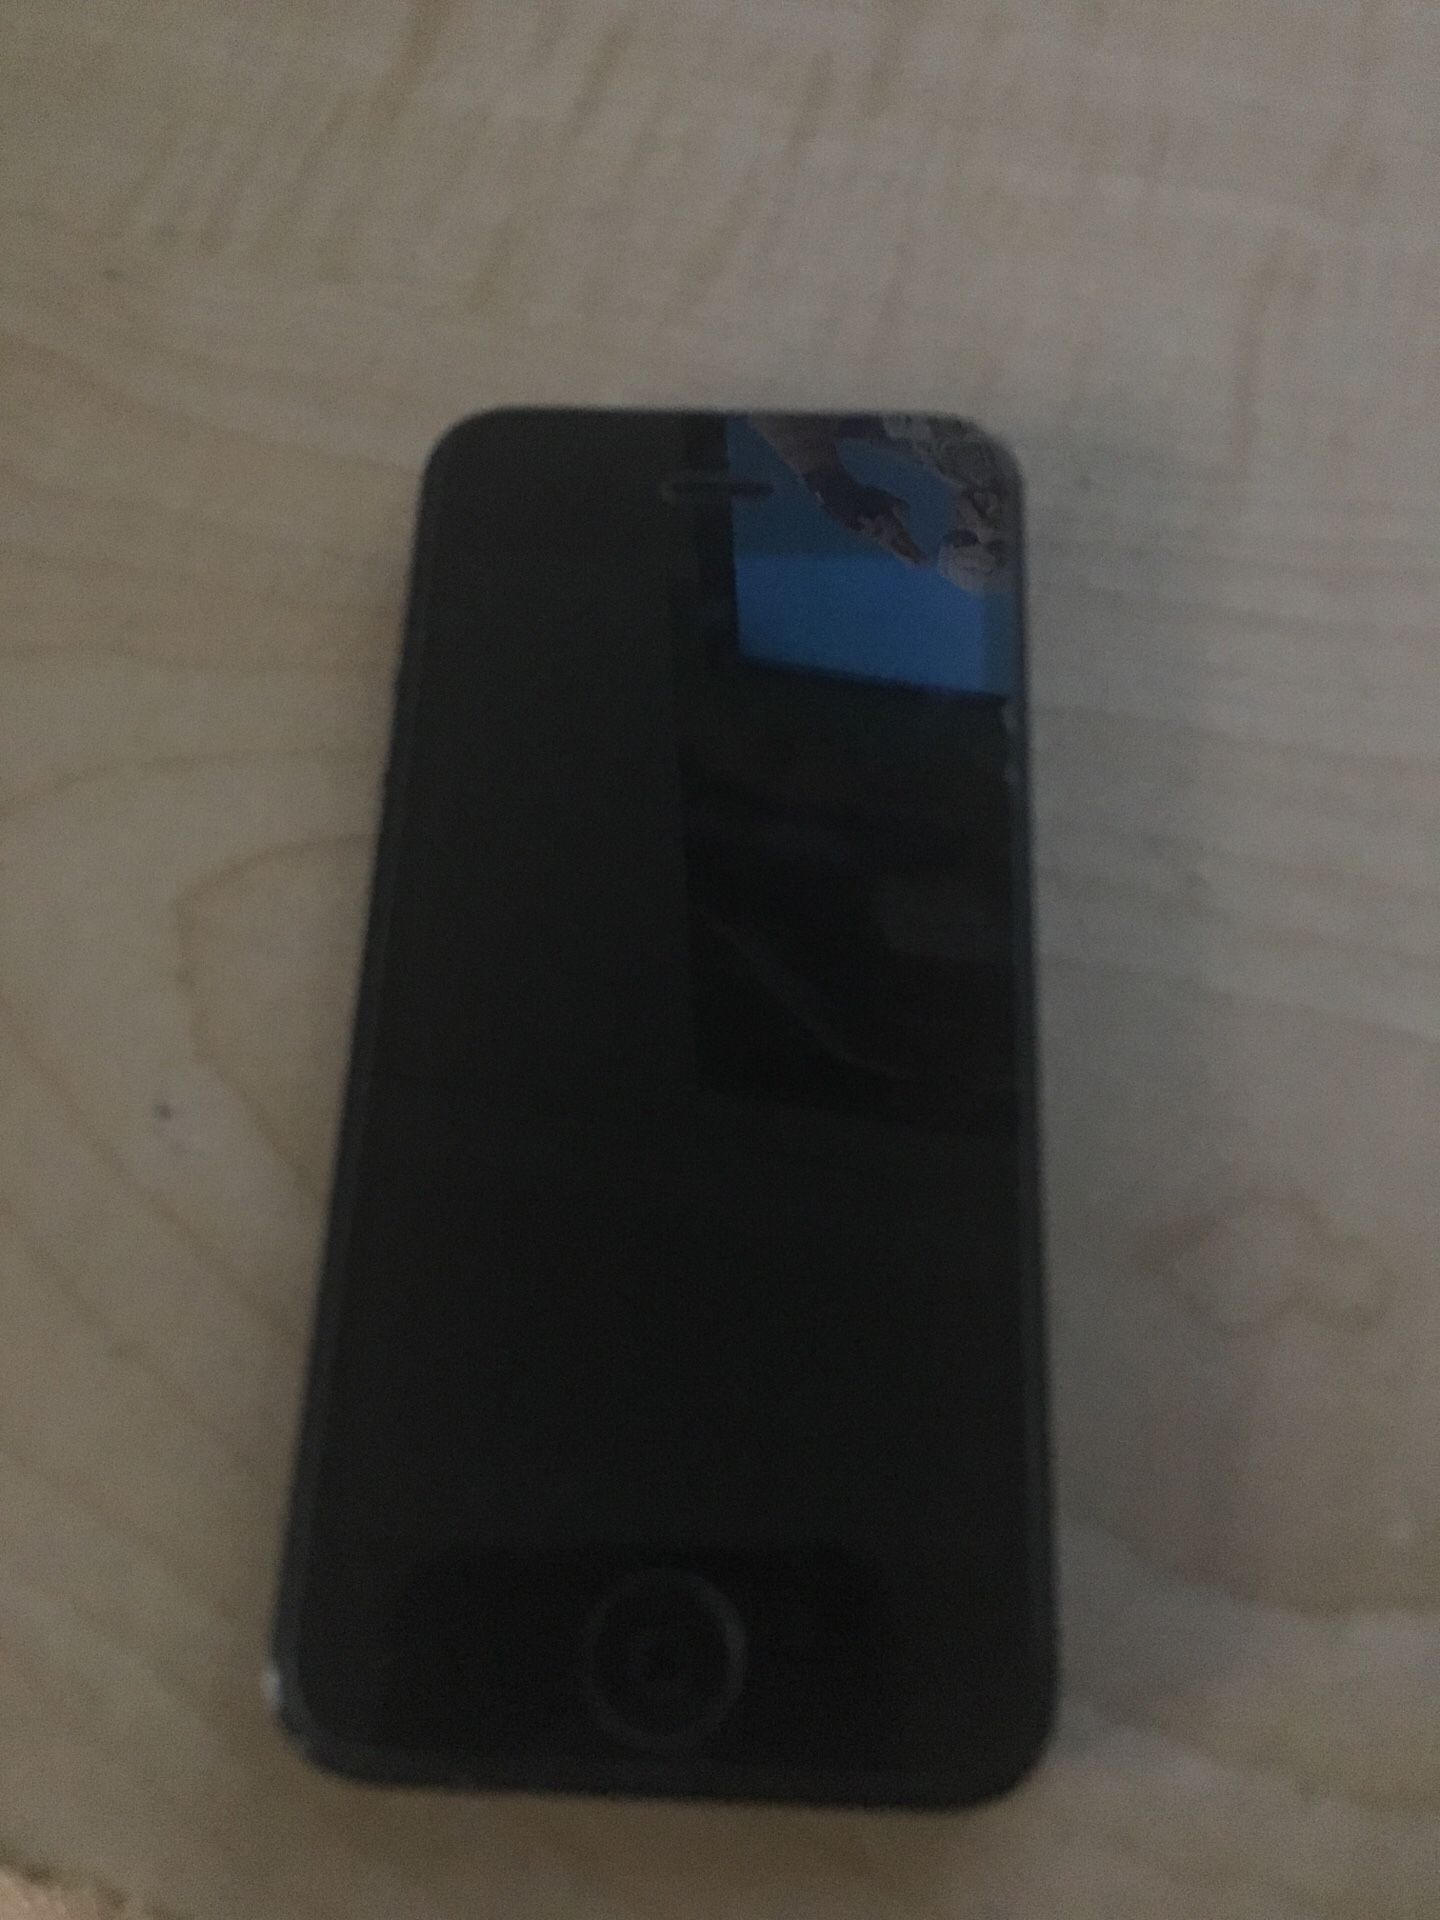 iPhone 5 for parts only needs a new battery